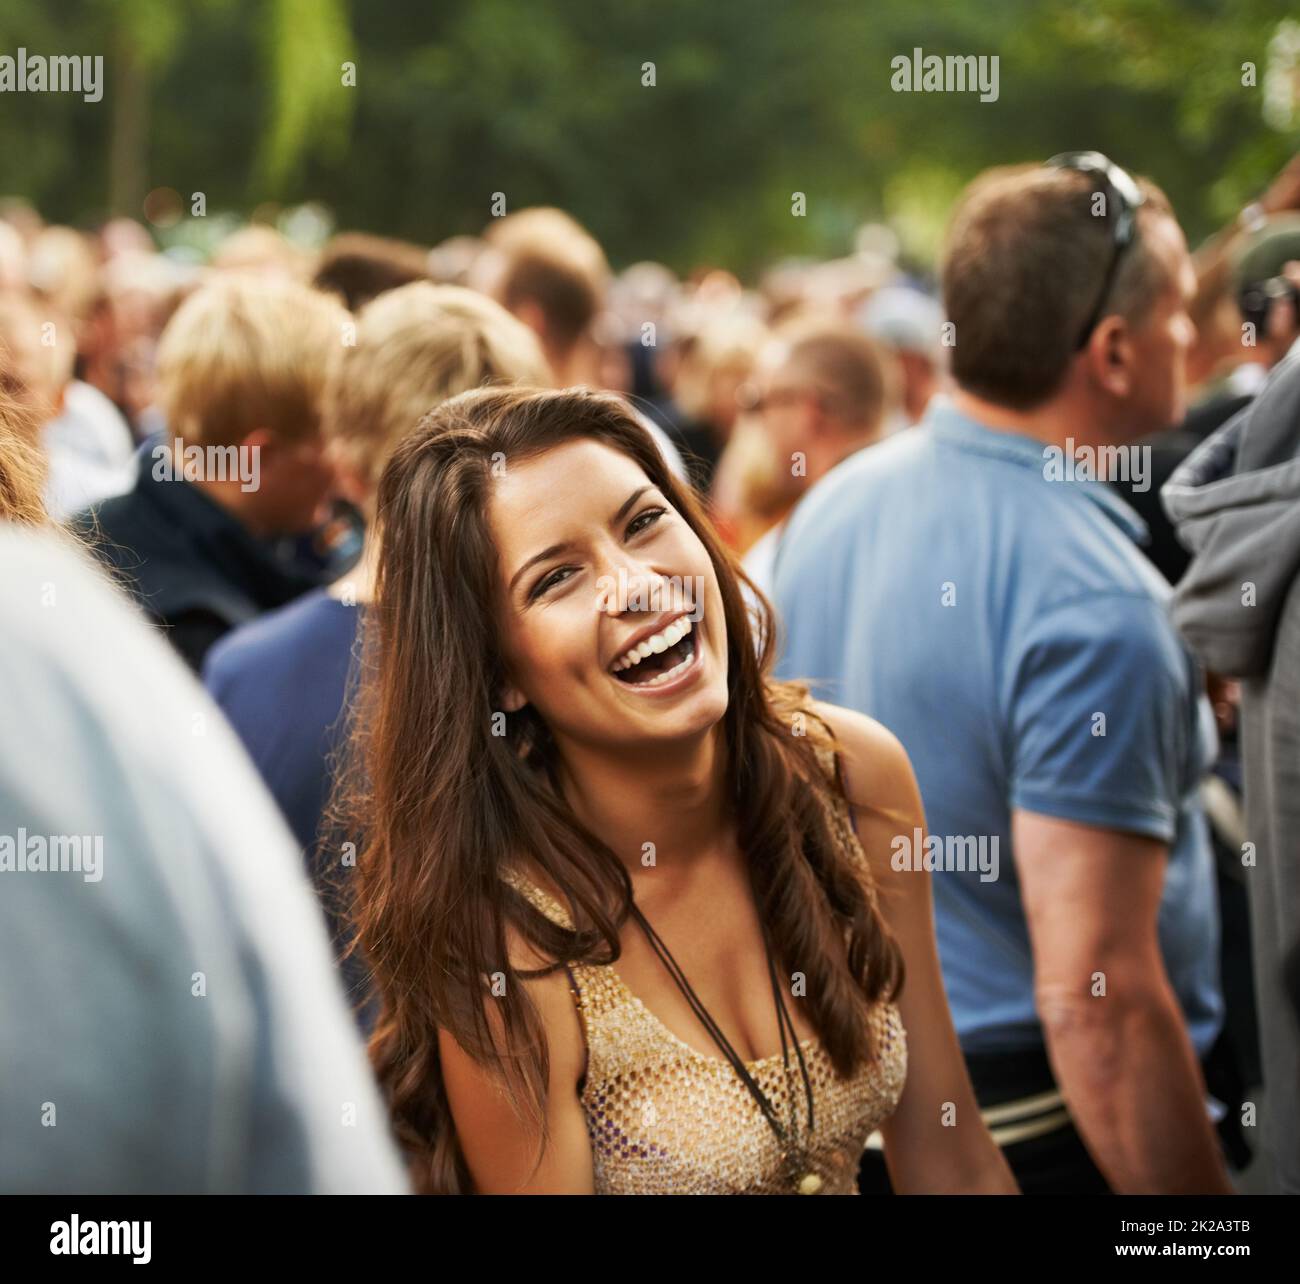 The most fun ever. Portrait of an attractive woman laughing in a crowd at a music festival. Stock Photo